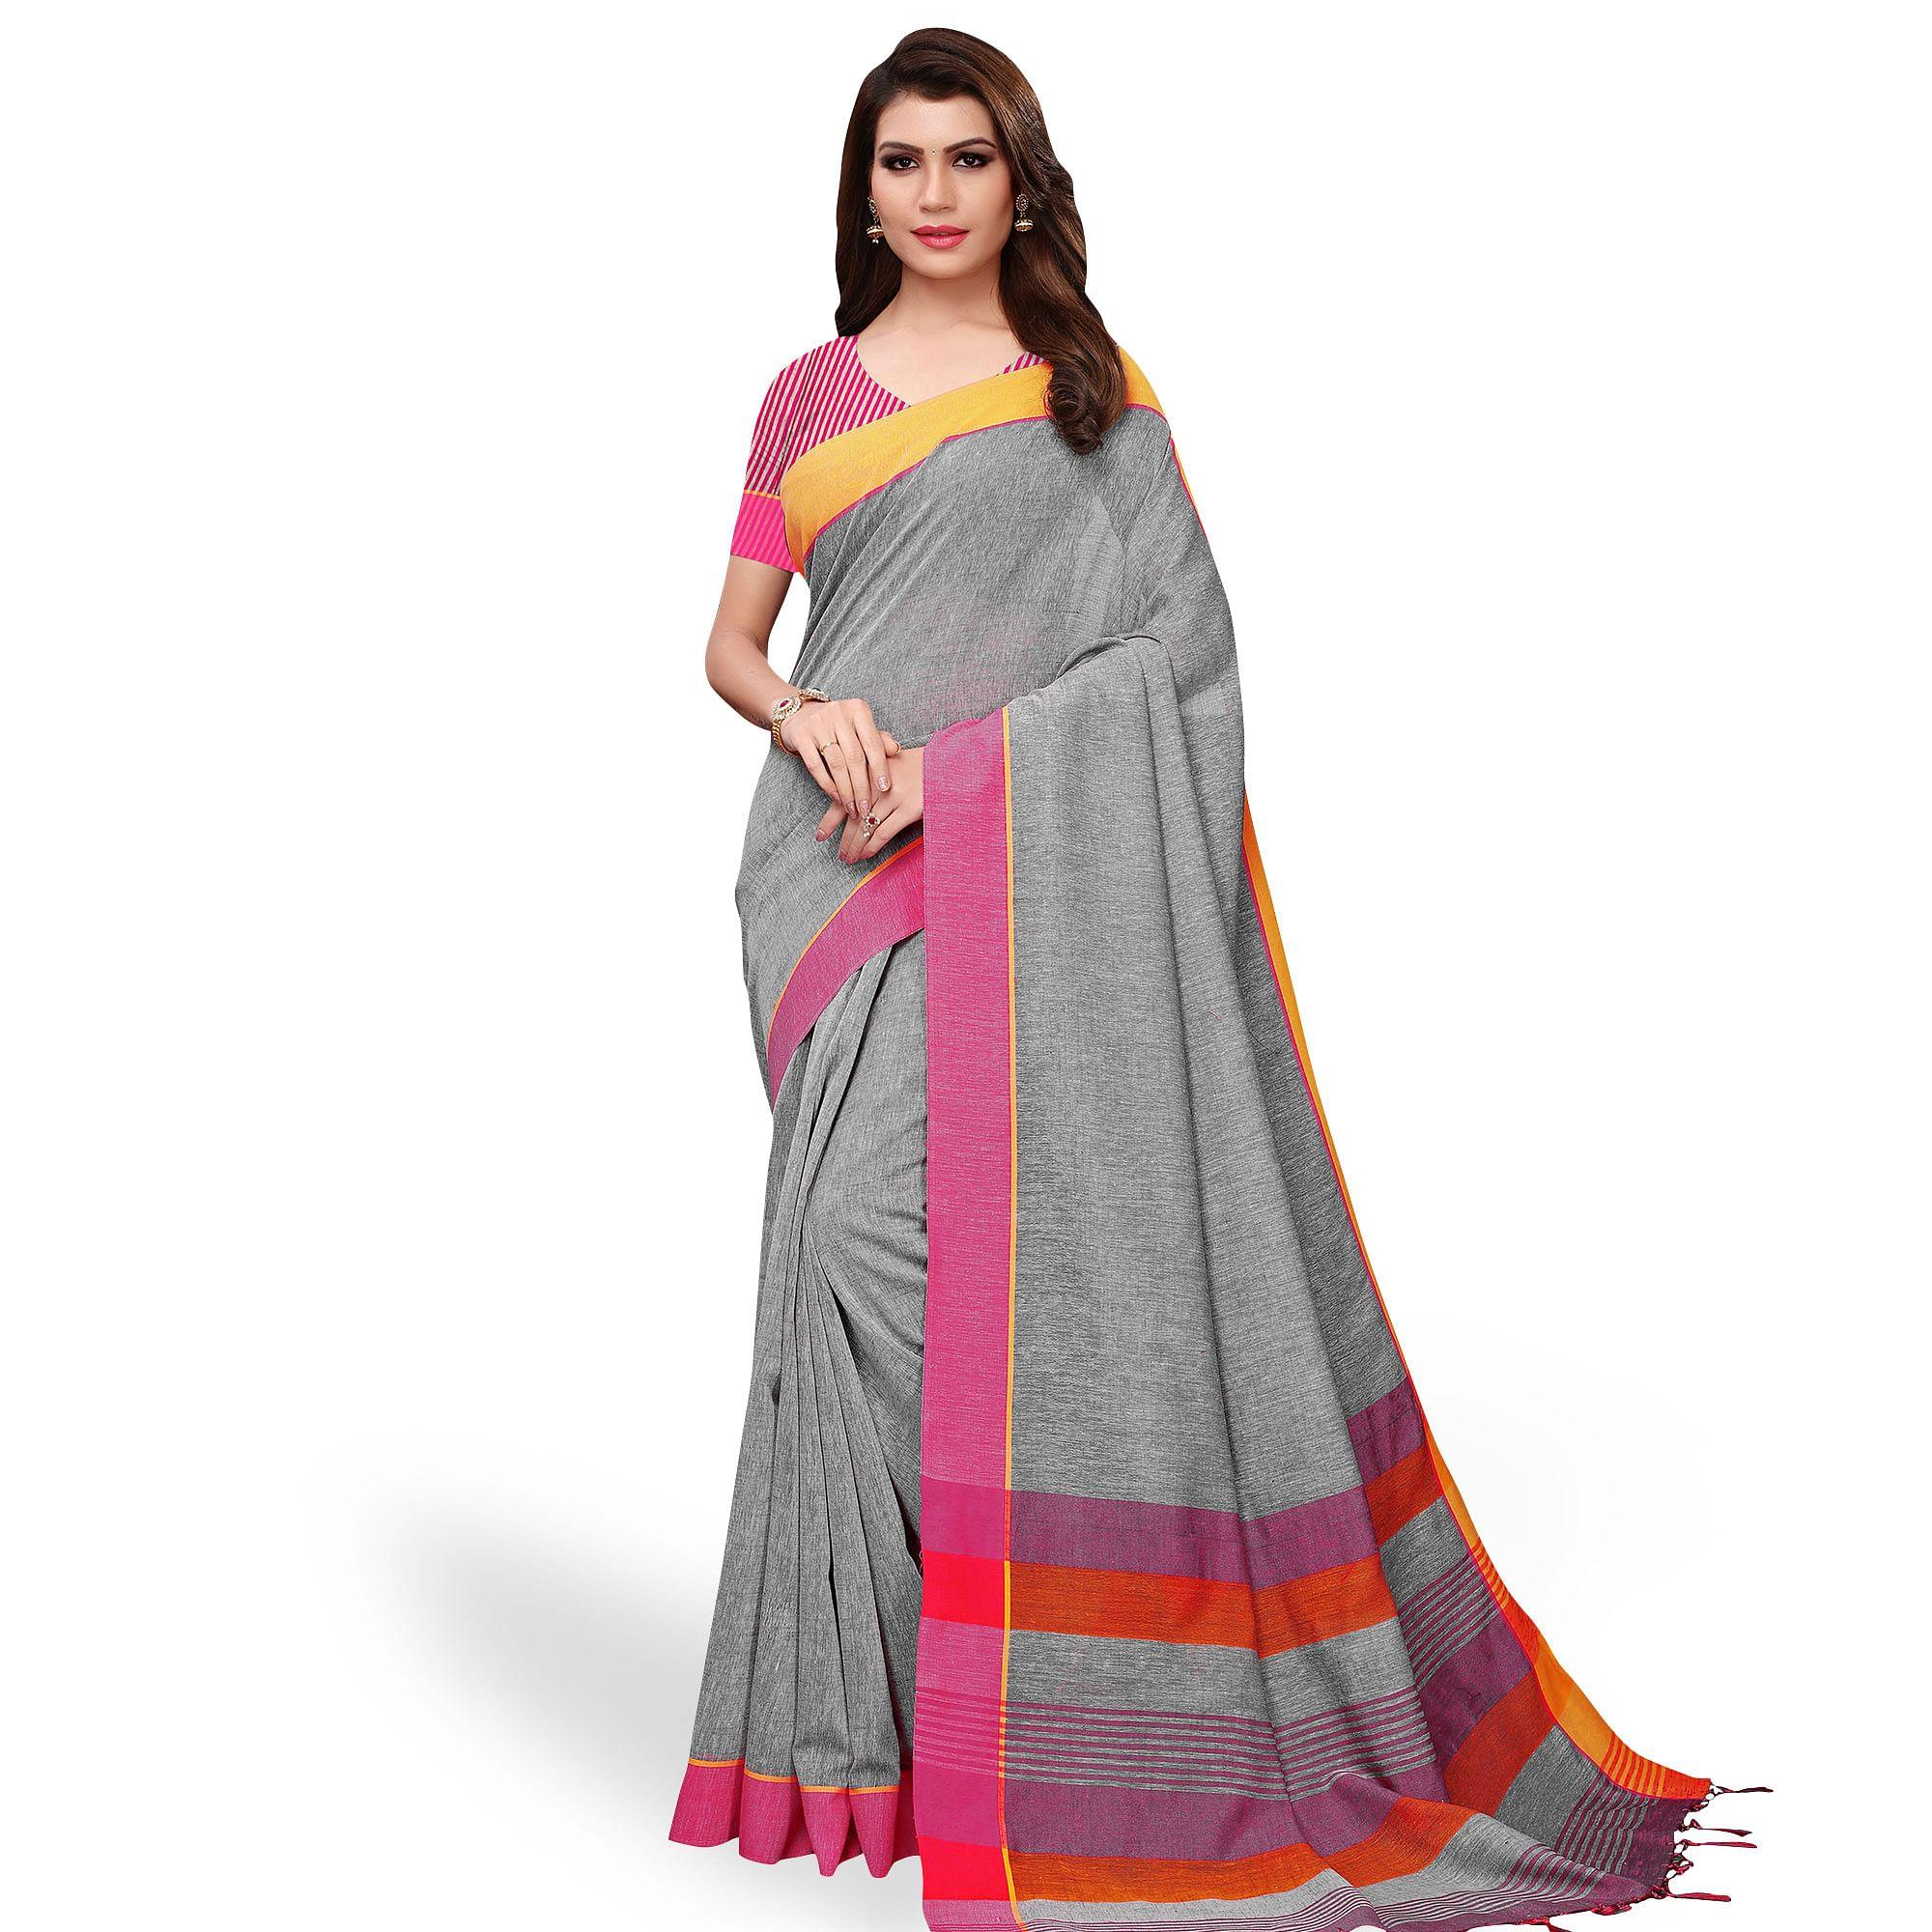 Engrossing Gray Colored Casual Wear Linen Saree - Peachmode